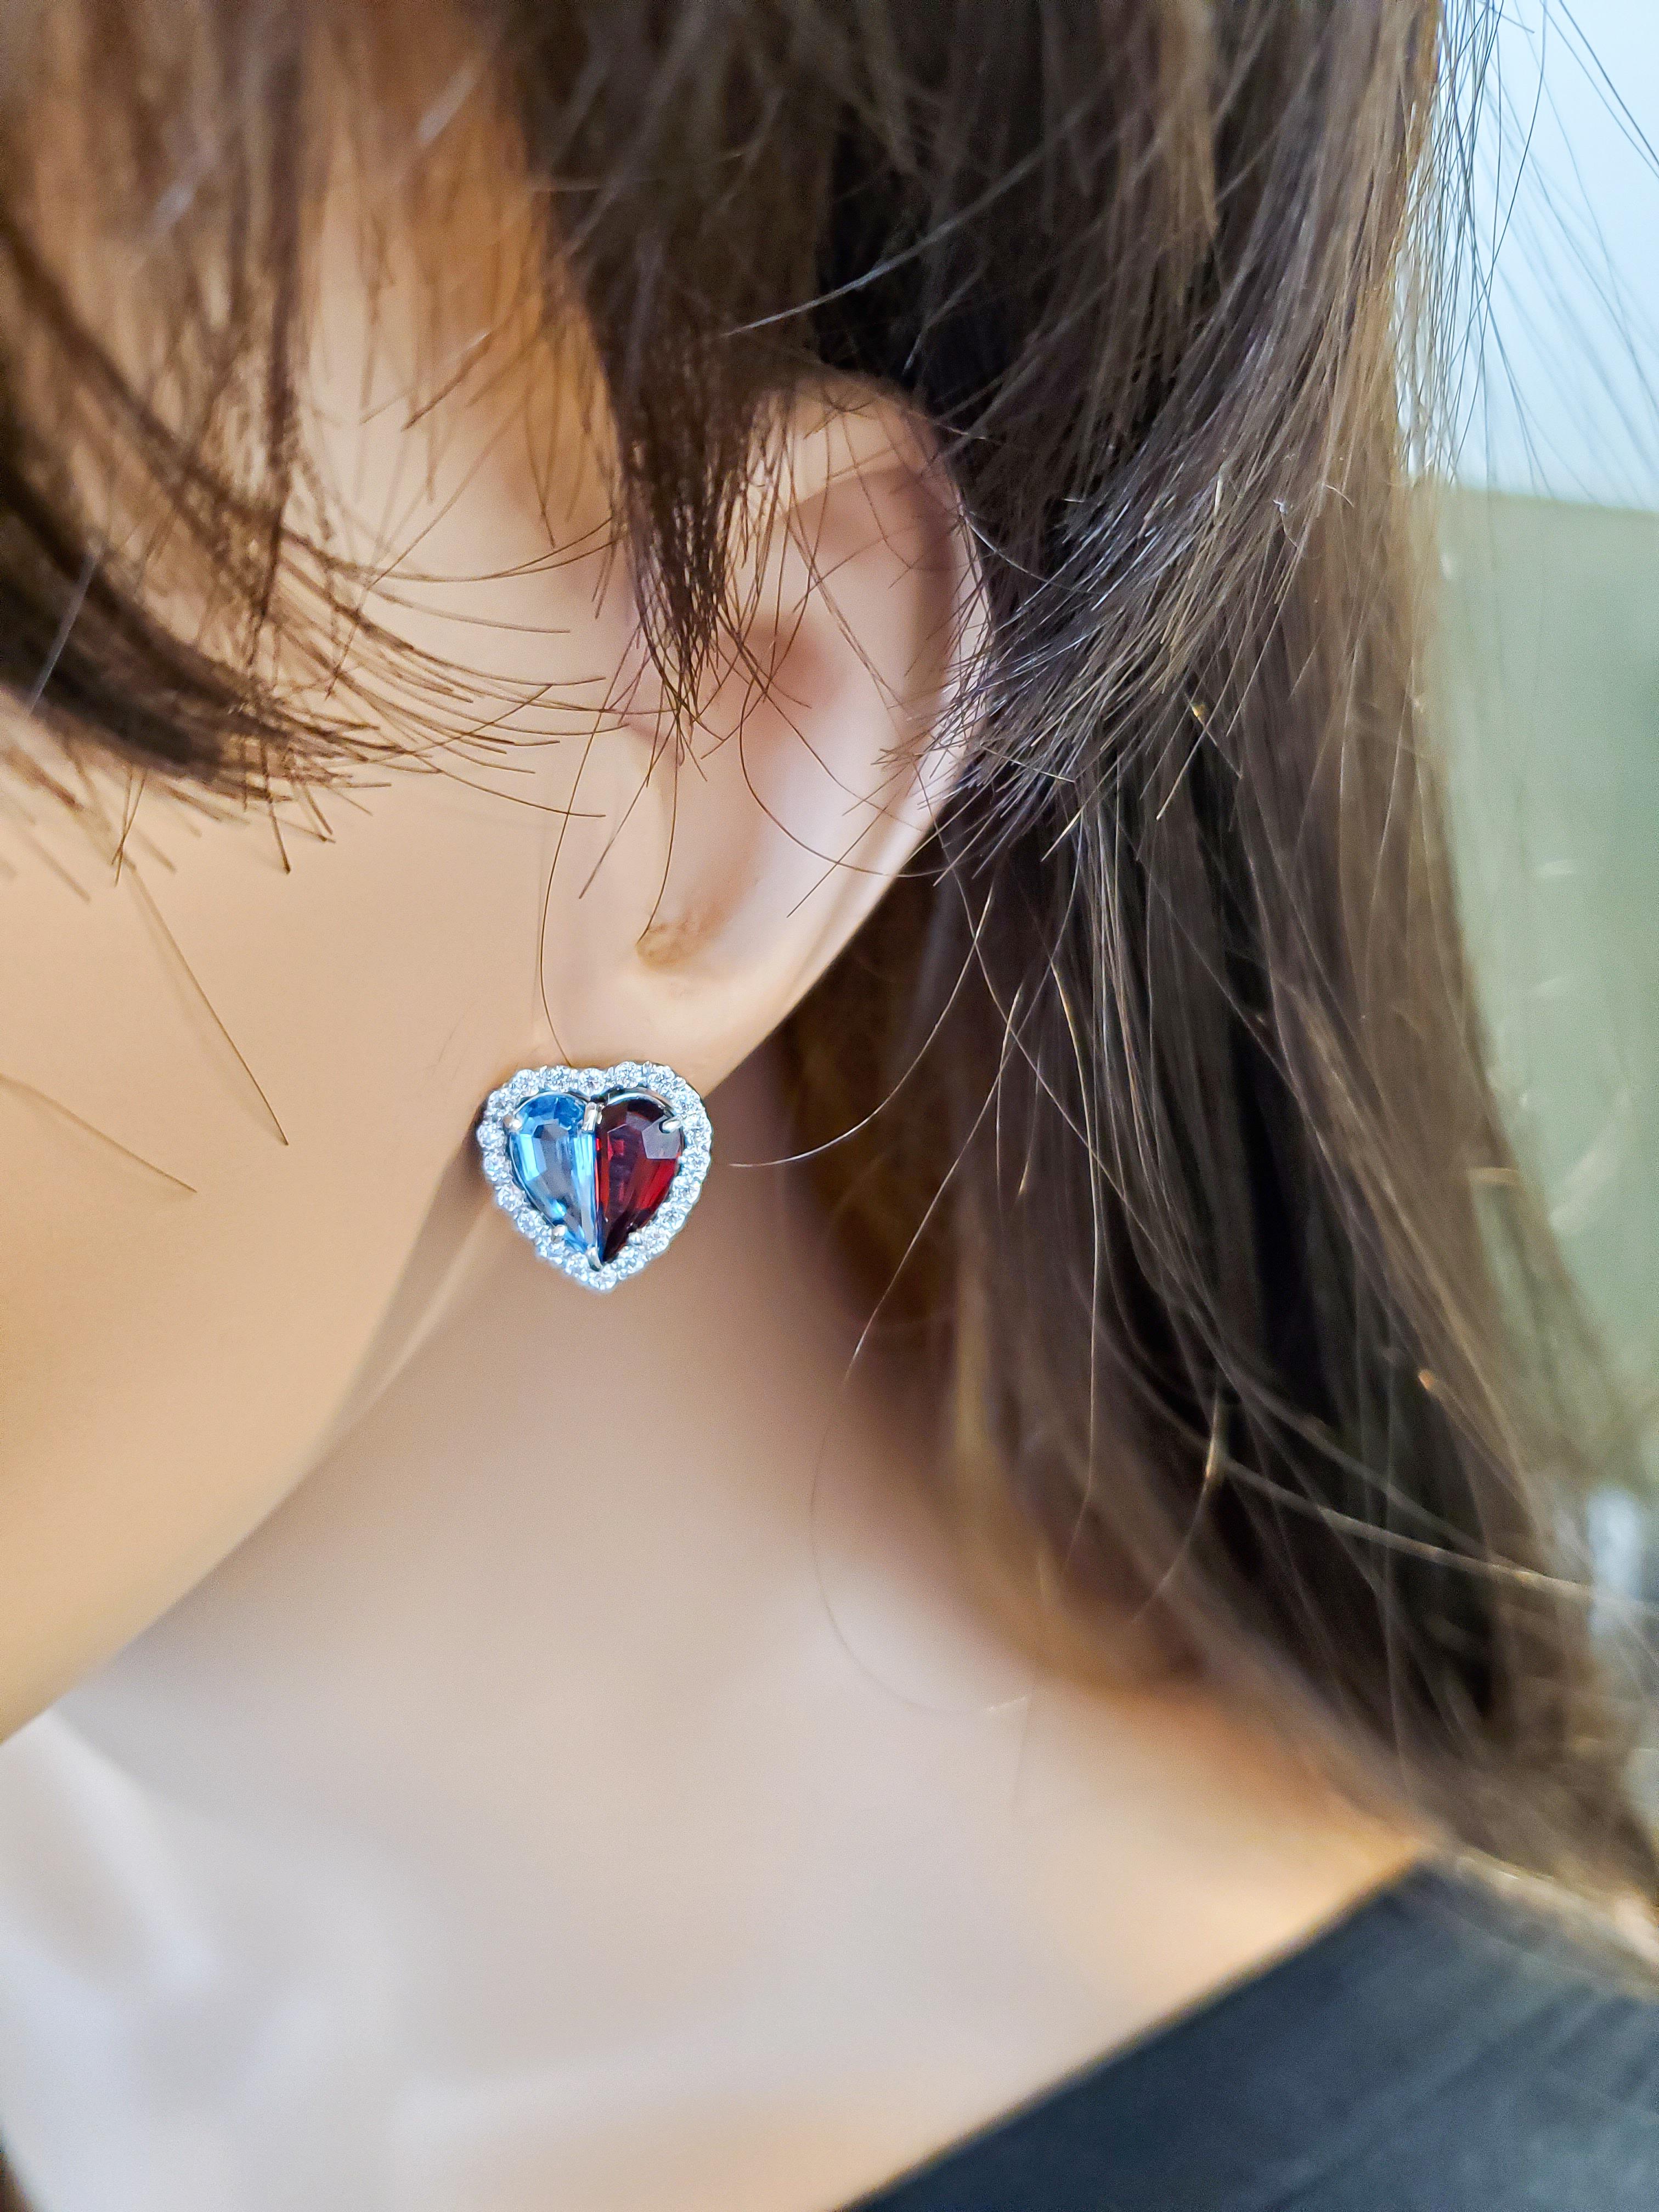 This lavish pair of earrings is designed in brightly polished 14 karat white gold and features expertly cut half-heart shaped Swiss blue topaz and dark red garnet stones in the center totaling 5.50 carats. These semi-precious colored gemstones are